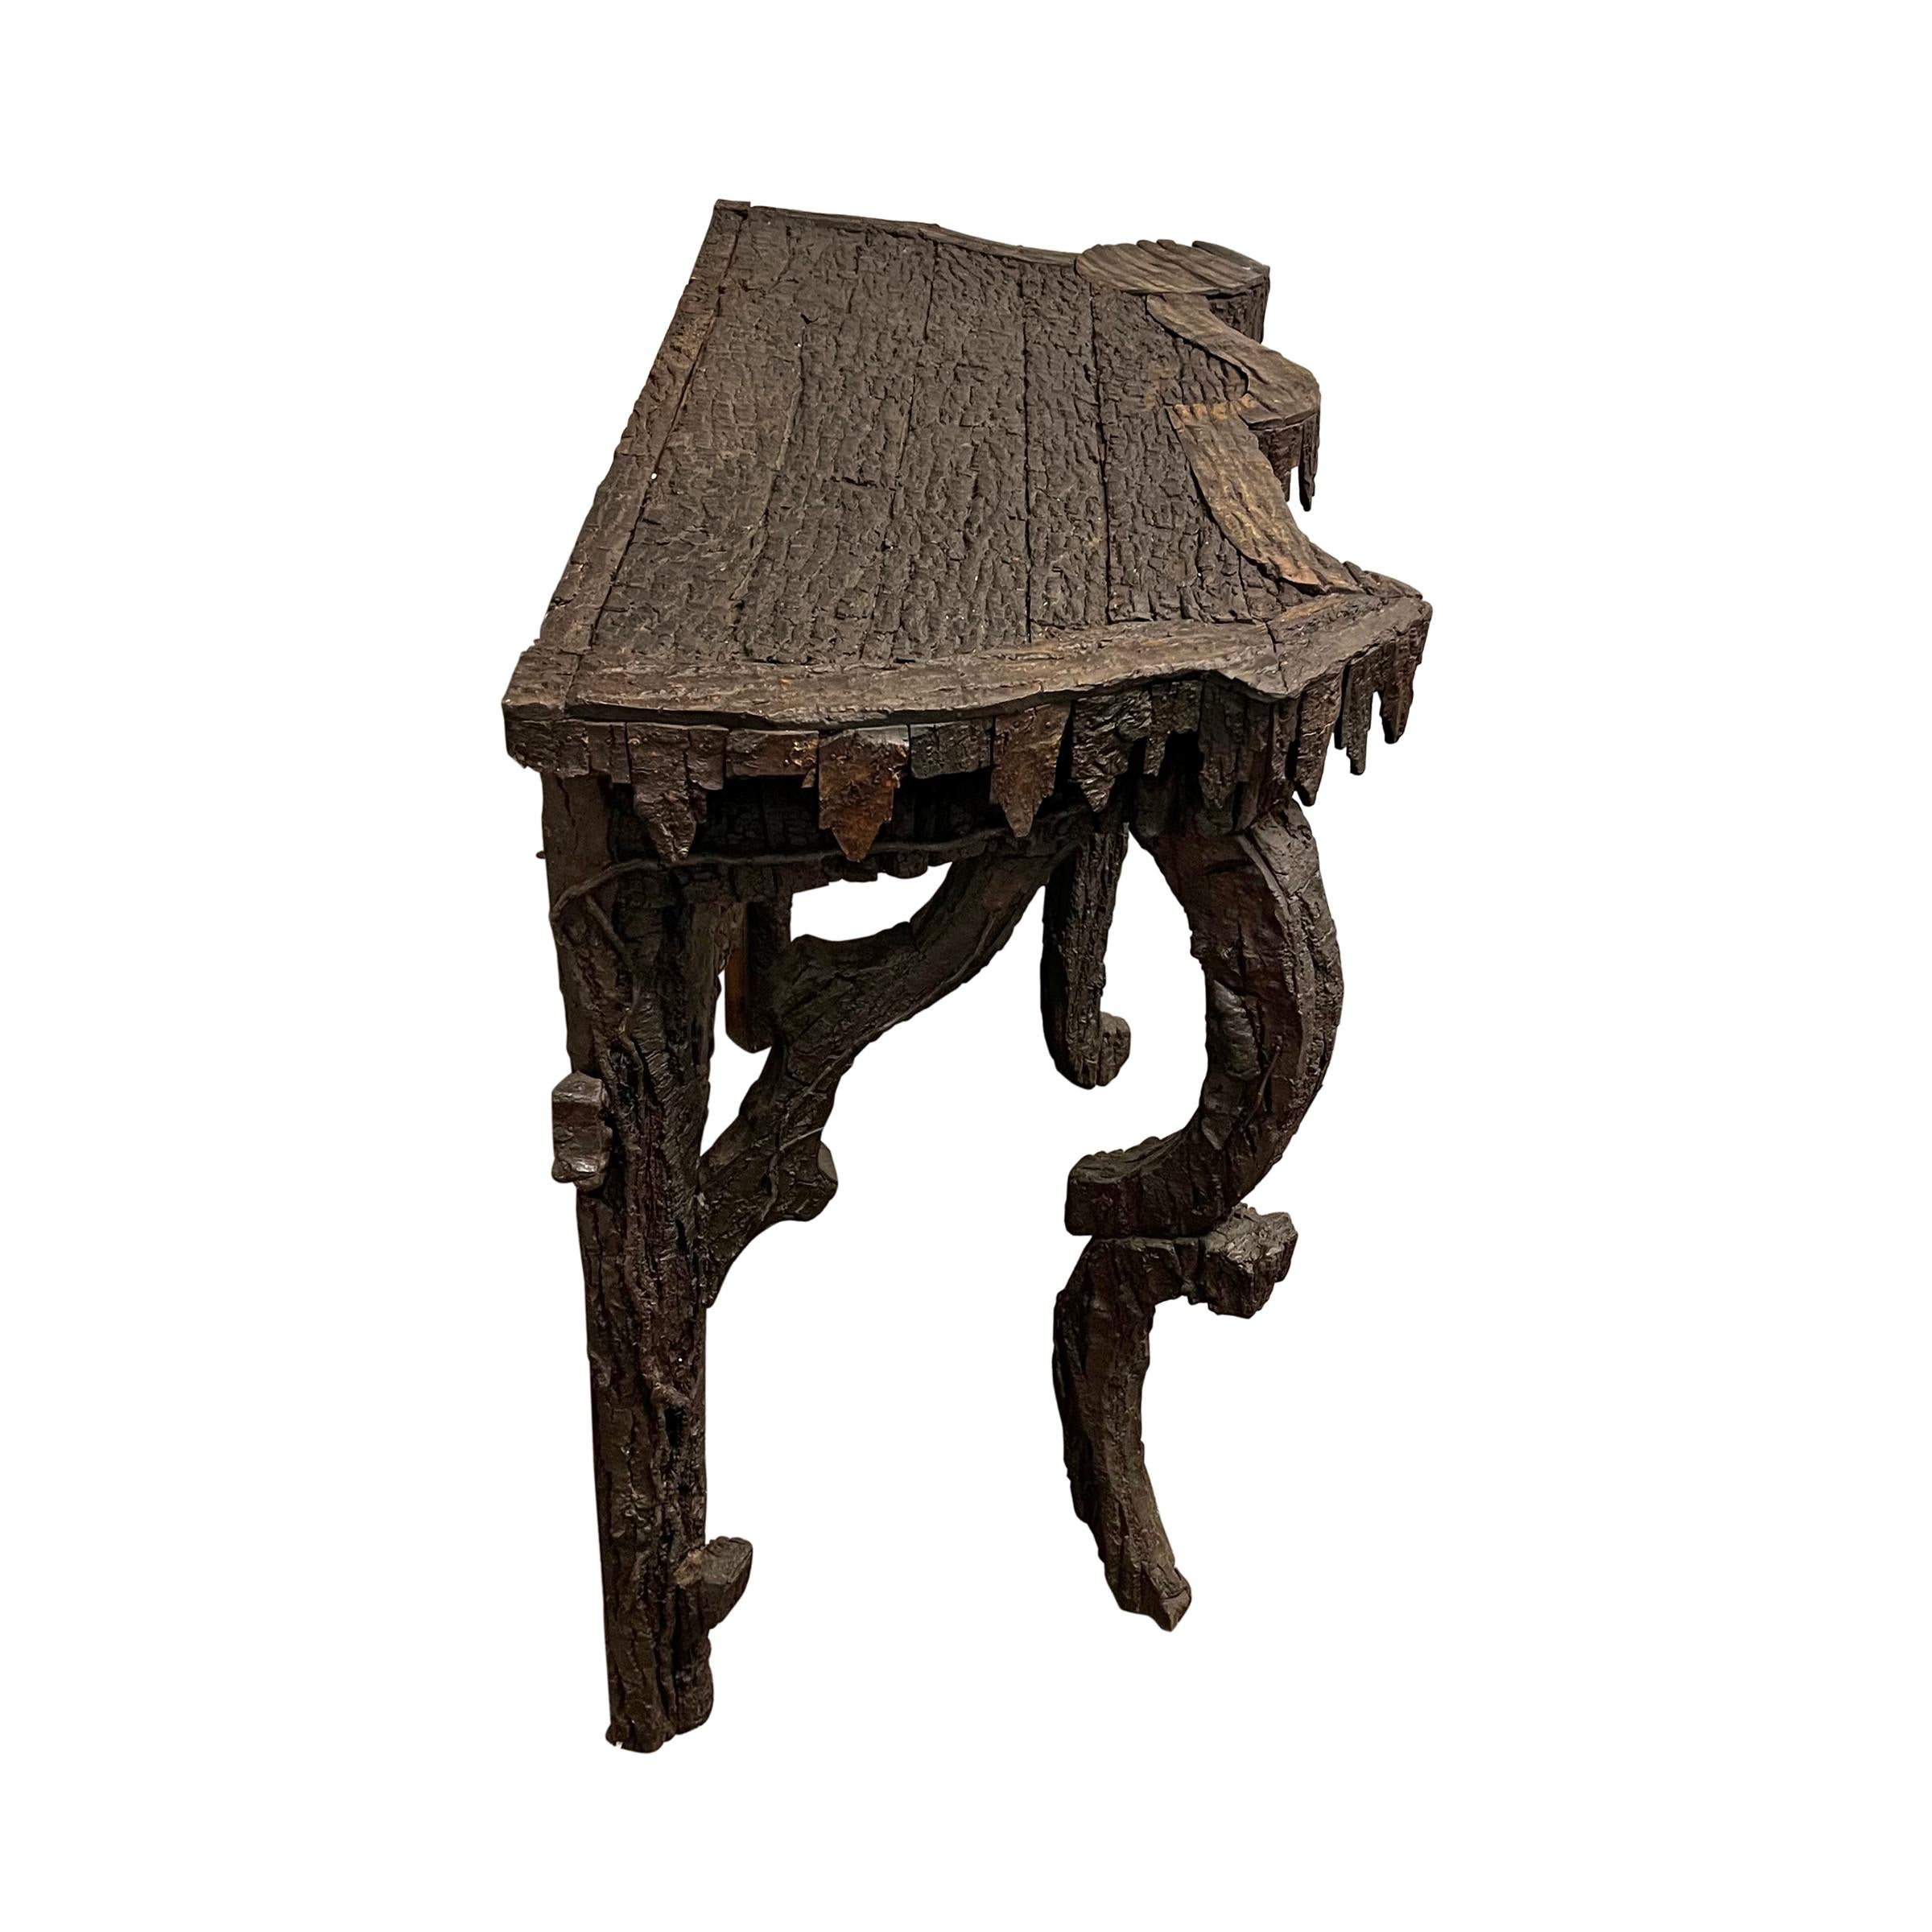 Wood Early 20th Century Italian Bark Console Table from a Tyrolean Chalet